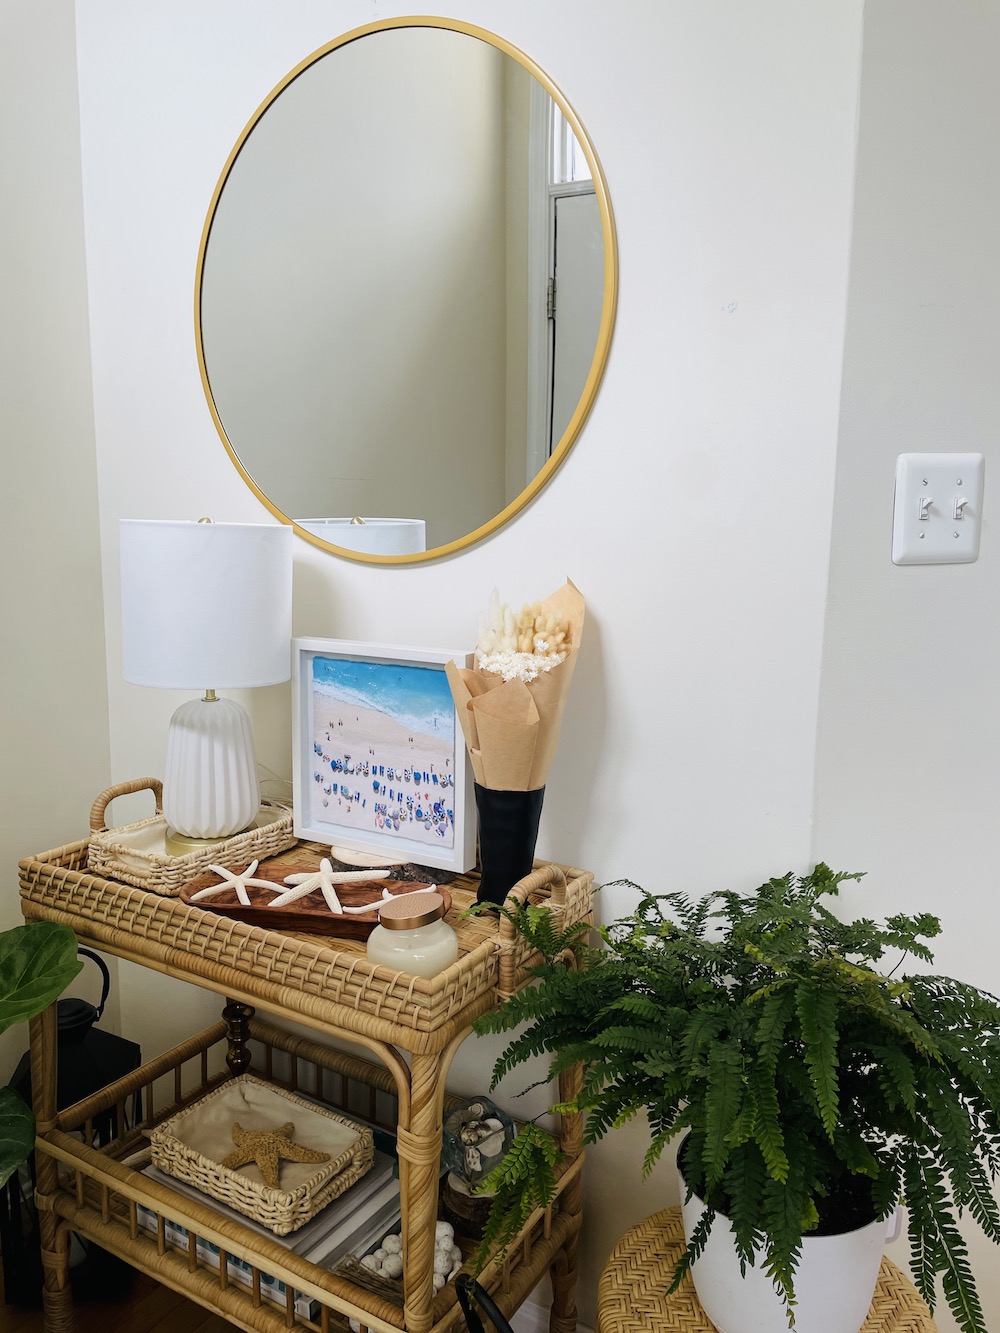 Side View Entryway Cart_2581 #Mirrors #RoundMirrors #GoldMirrors #Foyer #ConsoleTable #StylingTips #HomeDecor